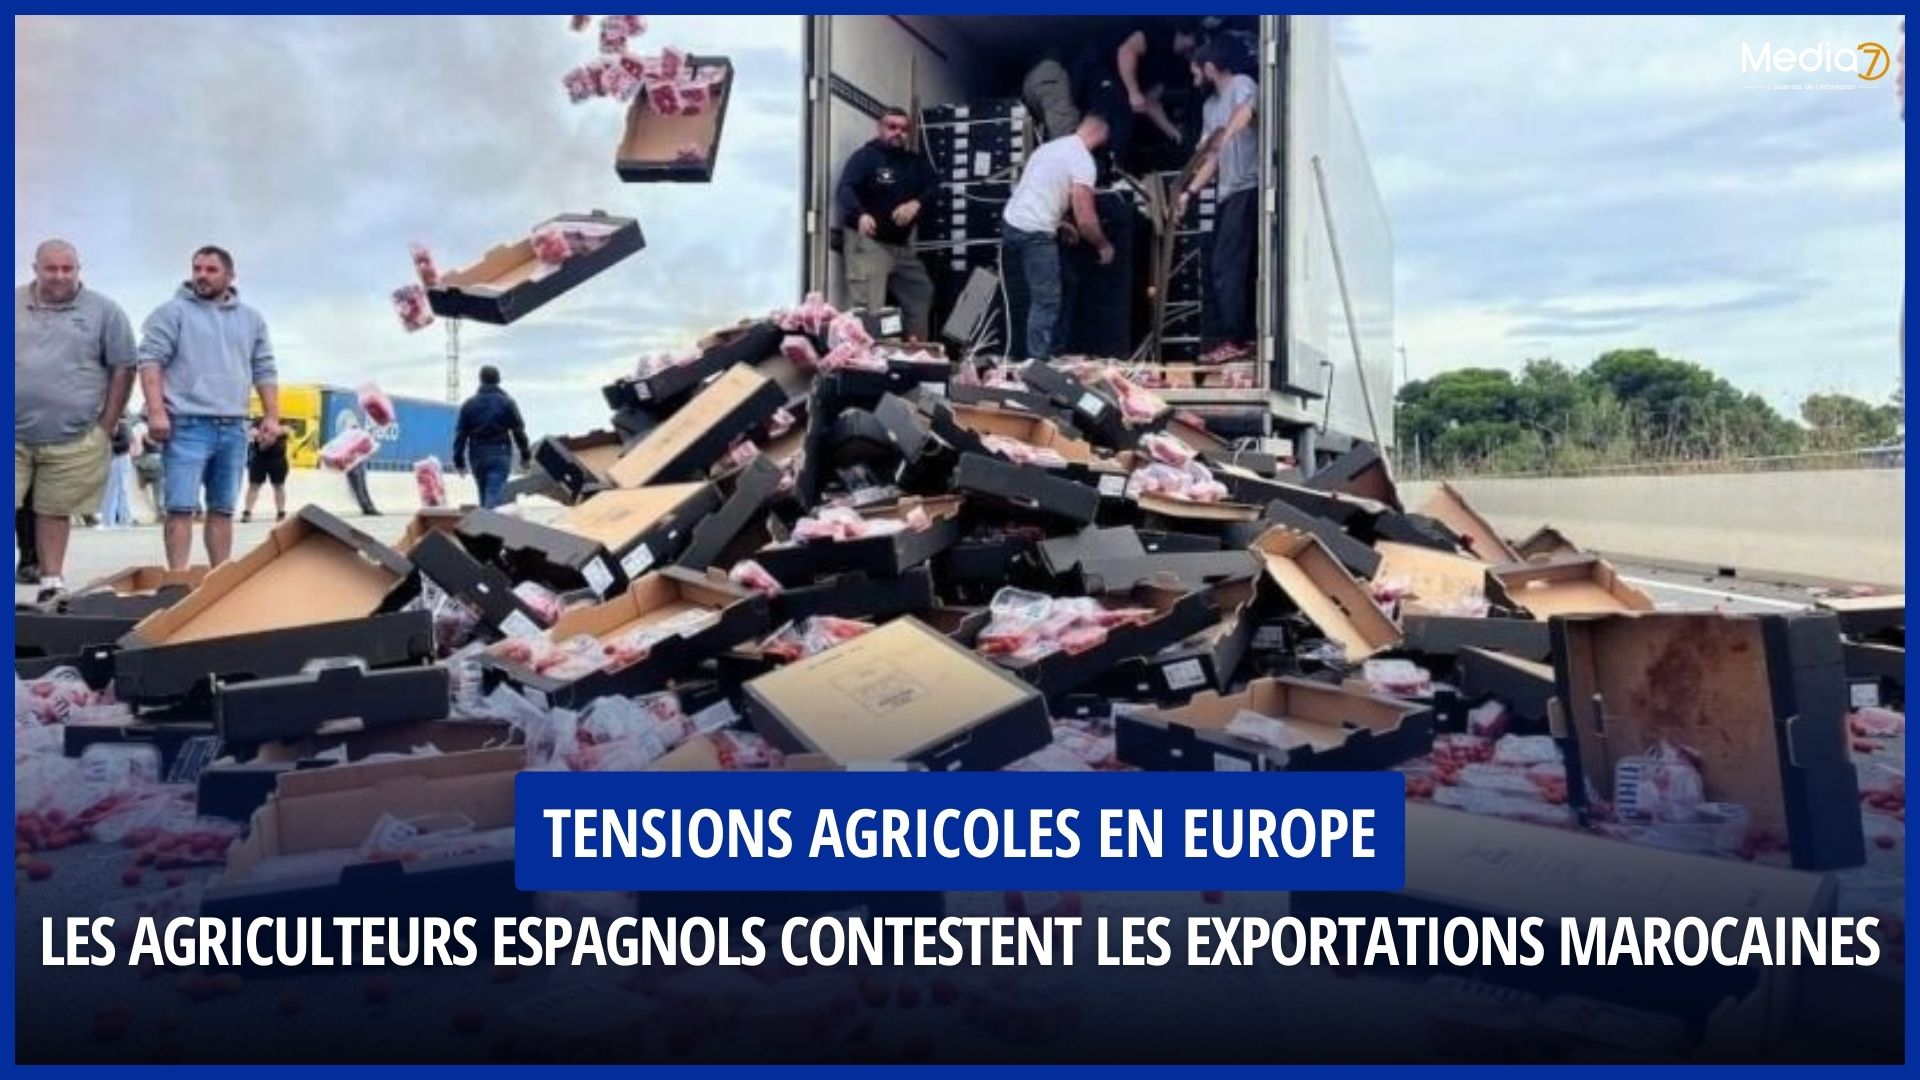 Spanish Farmers Incite the French Against Moroccan Exports